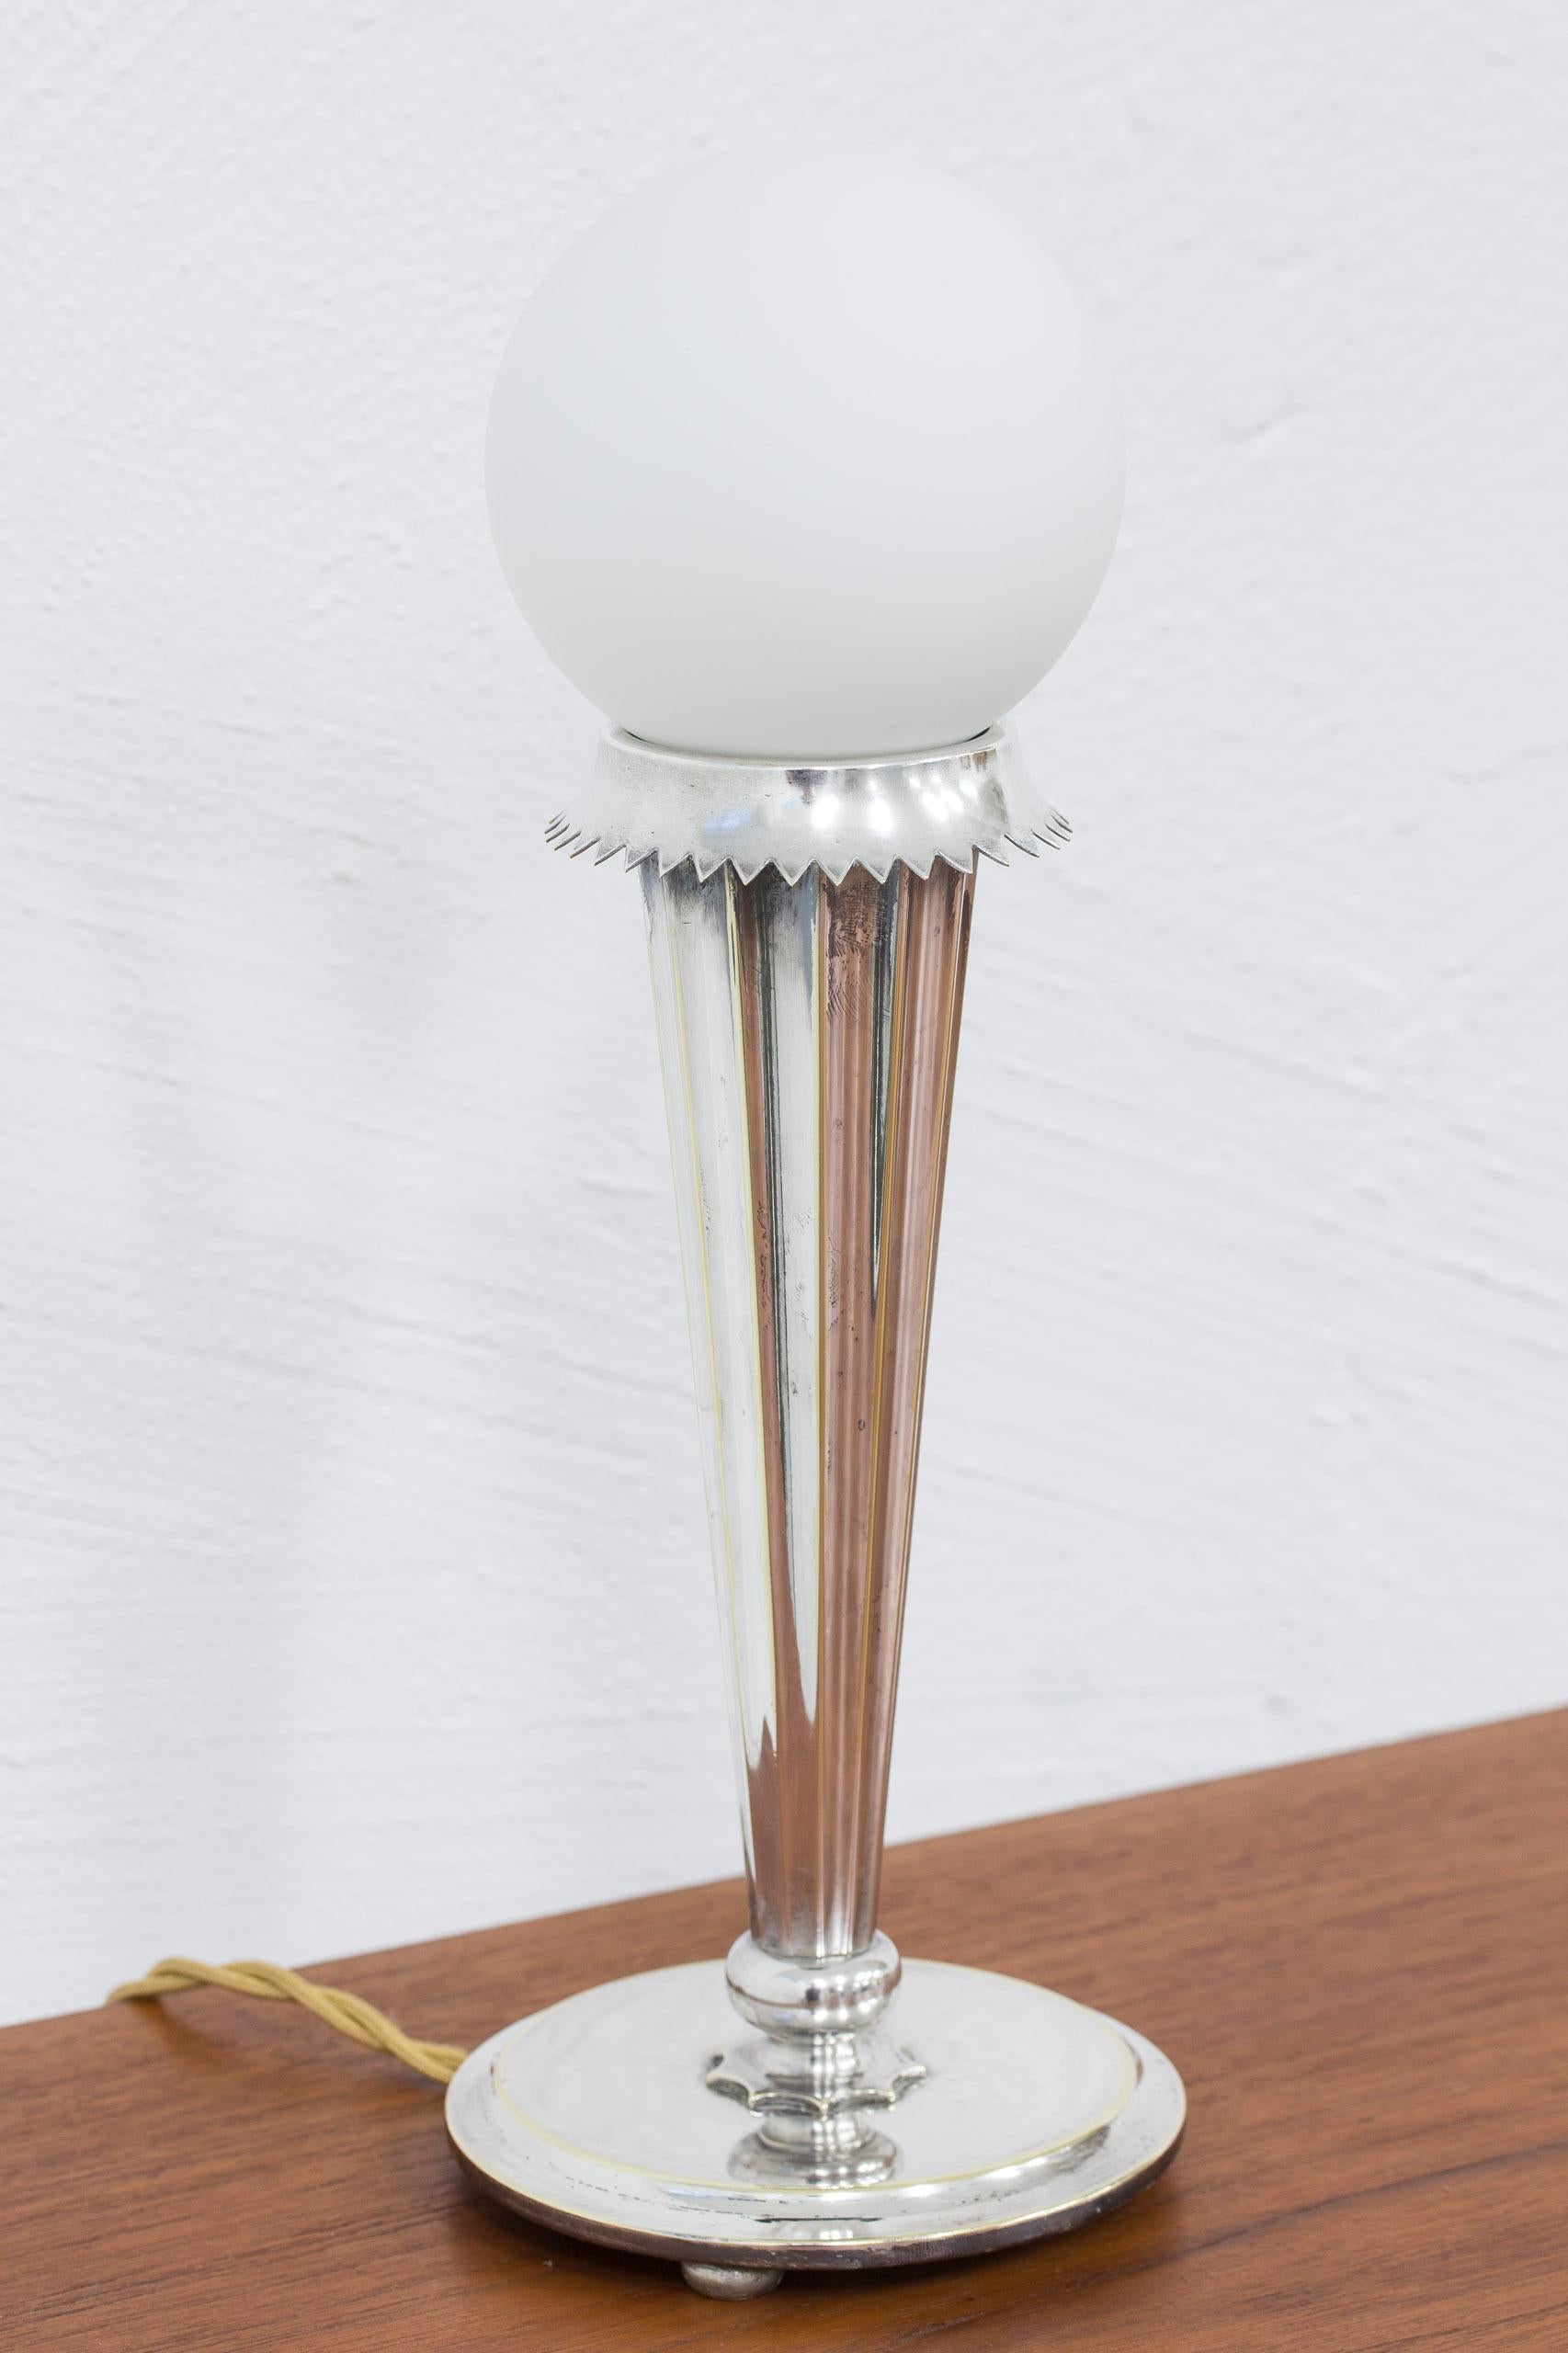 Table lamp 6853 designed by Harald Elof Notini. Produced by Böhlmarks lampfabrik in Stockholm Sweden during the 1920s. Made from silver plated brass with an opal glass shade of later date. Good vintage condition with age related patina and